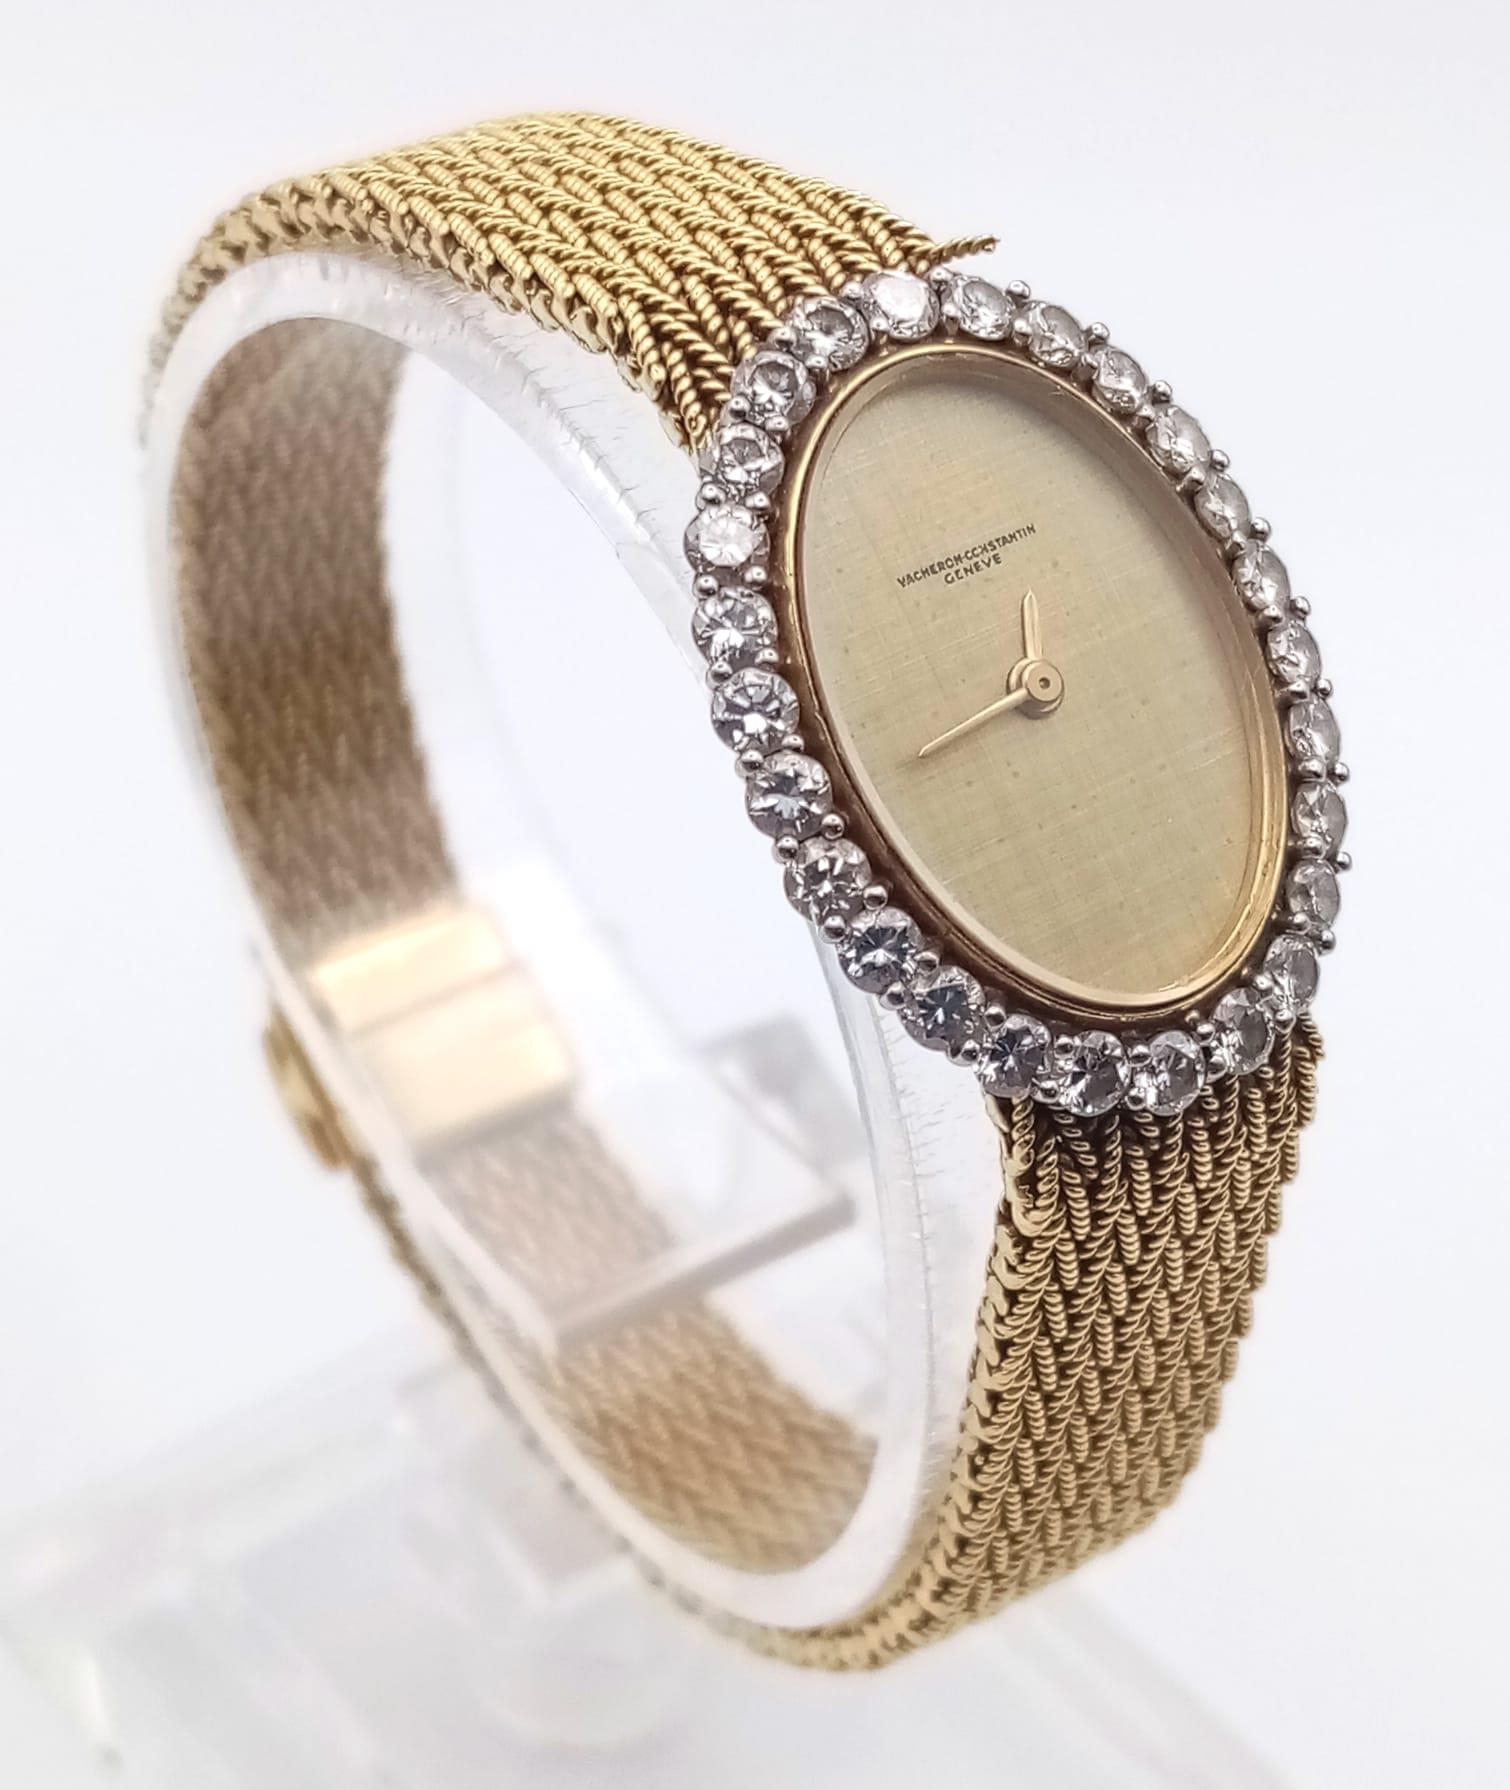 A Vacheron-Constantin 18K Yellow Gold and Diamond Ladies Watch. Gold bracelet and oval case - - Image 2 of 8